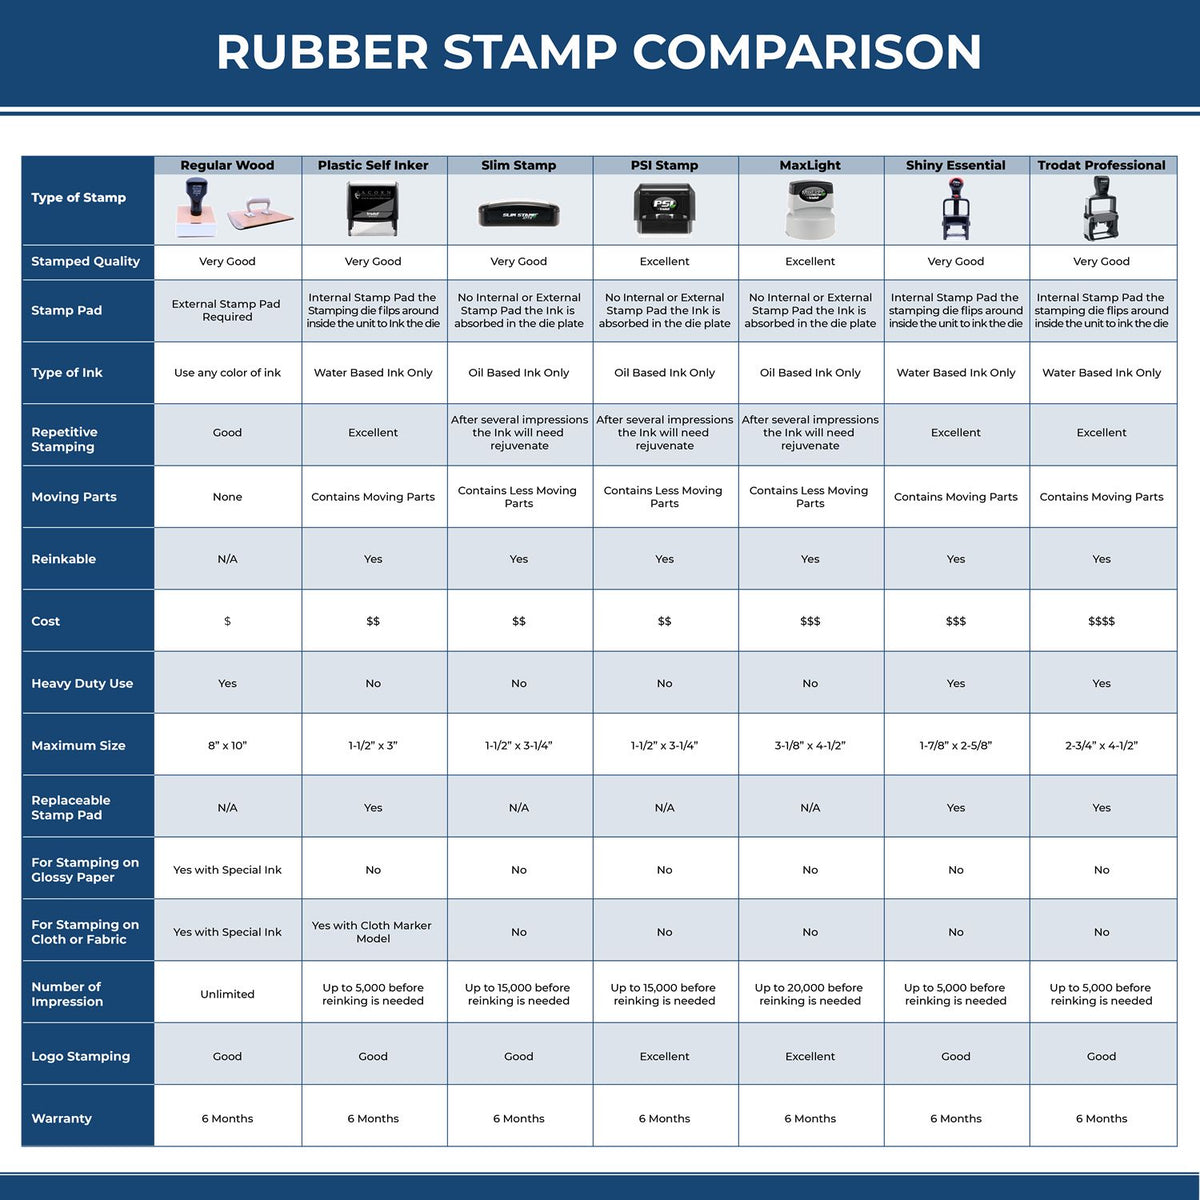 A comparison chart for the different types of mount models available for the PSI New Jersey Notary Stamp.